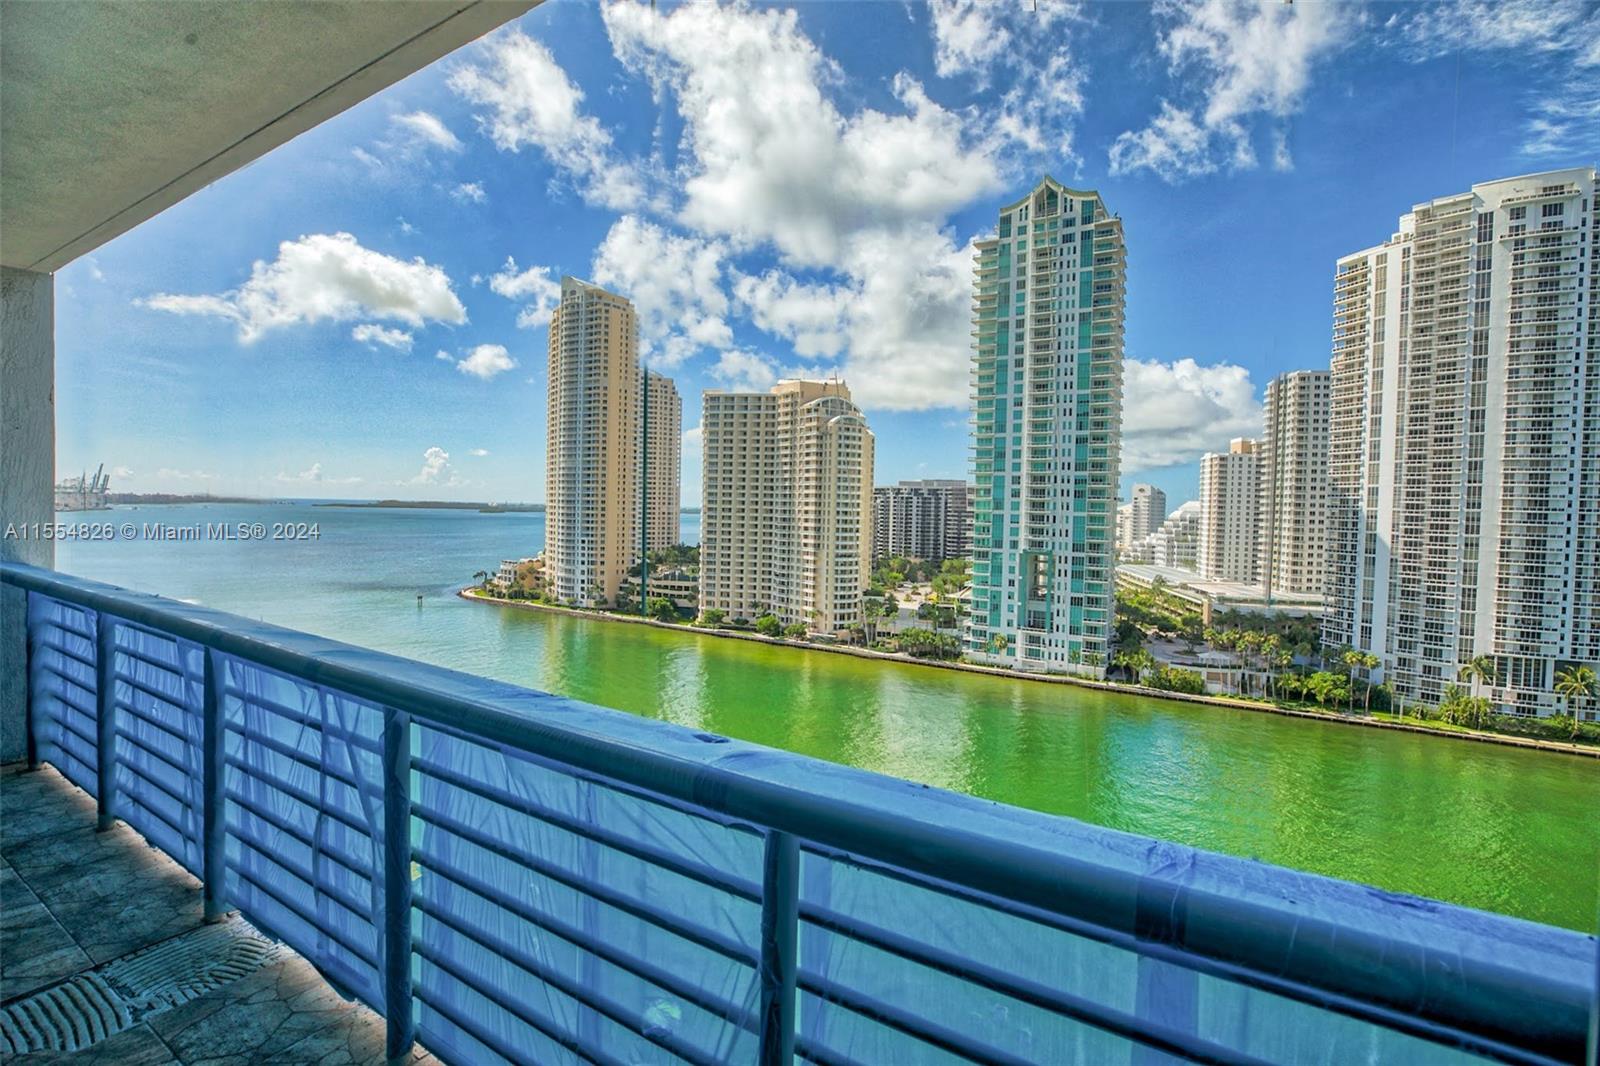 Beautiful 1 bedroom 1 bath condo with direct views of Biscayne Bay, Miami River, and Brickell Skyline. Condo has
tiles throughout, with wood kitchen cabinets and stainless steel appliances, granite countertops, and marble bath.
Amenities includes: 2 swimming pools, Jacuzzi, 2 Party Rooms, 2 Fitness Centers, Business Ctr., Convenience
Store, 24 hrs Security, Valet, and Concierge. Centrally located in Downtown Miami within minutes to Brickell, SoBe,
Grove, Gables, Design District, and Airport. Sales office in bldg.